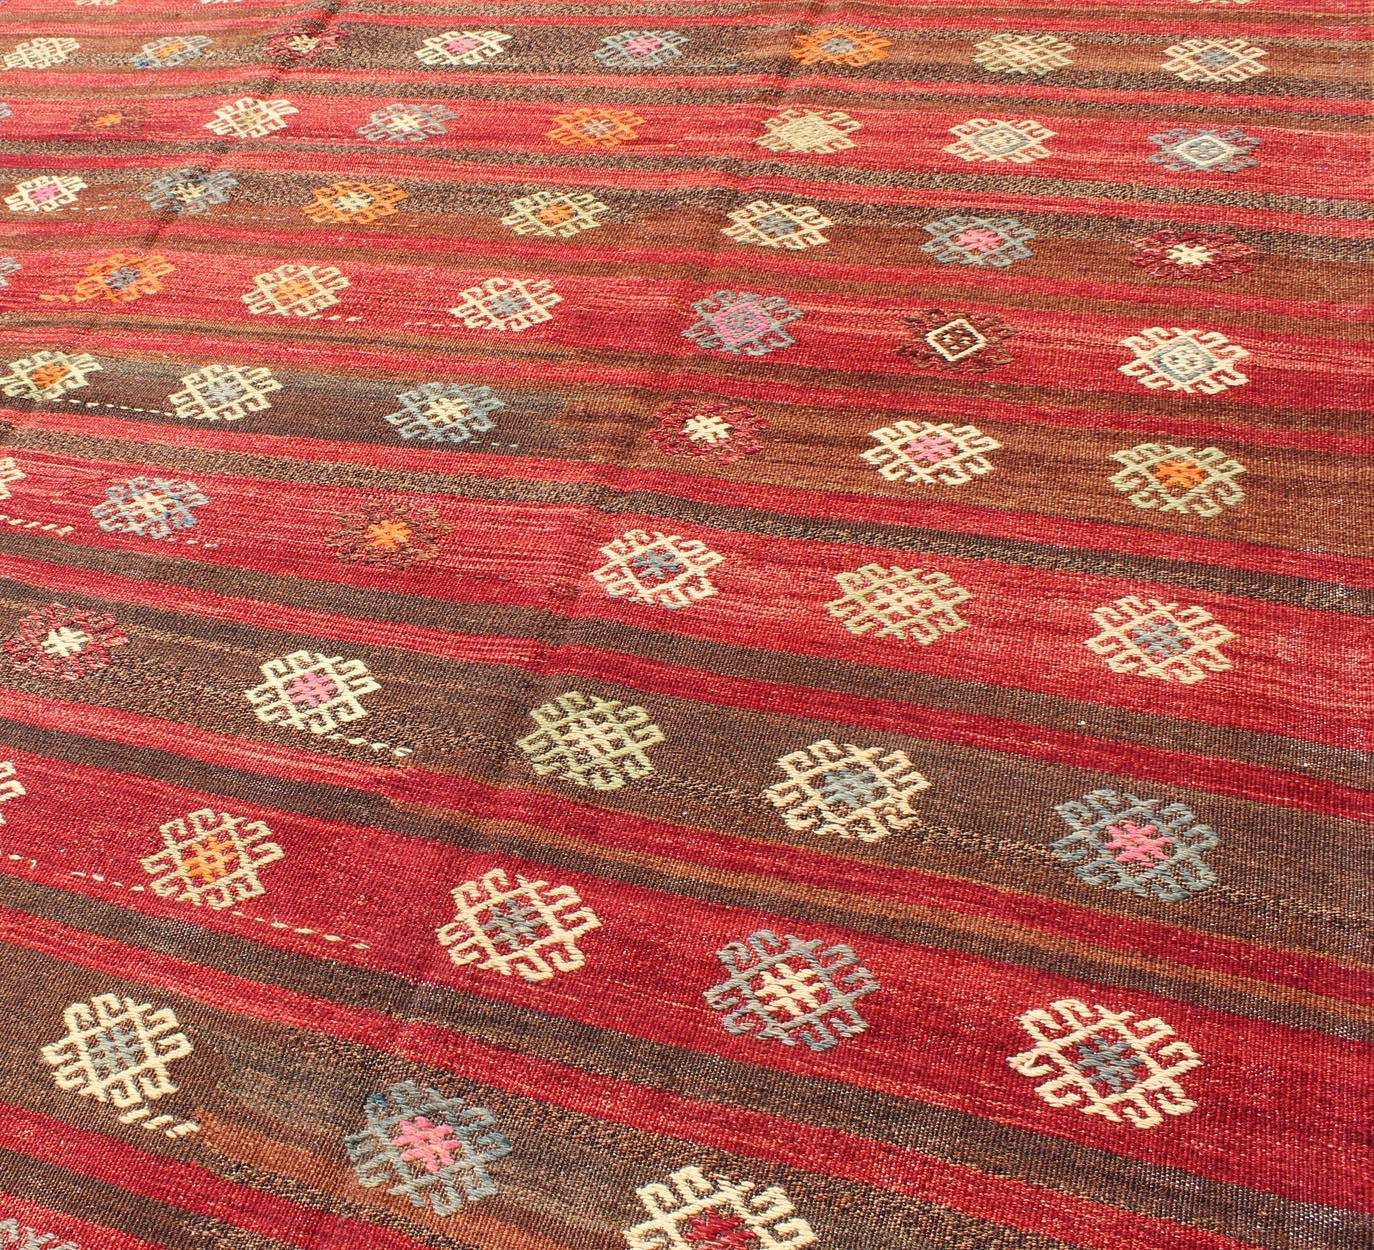 Wool Red and Brown Striped Turkish Hand Woven Kilim Rug with Geometric Shapes For Sale